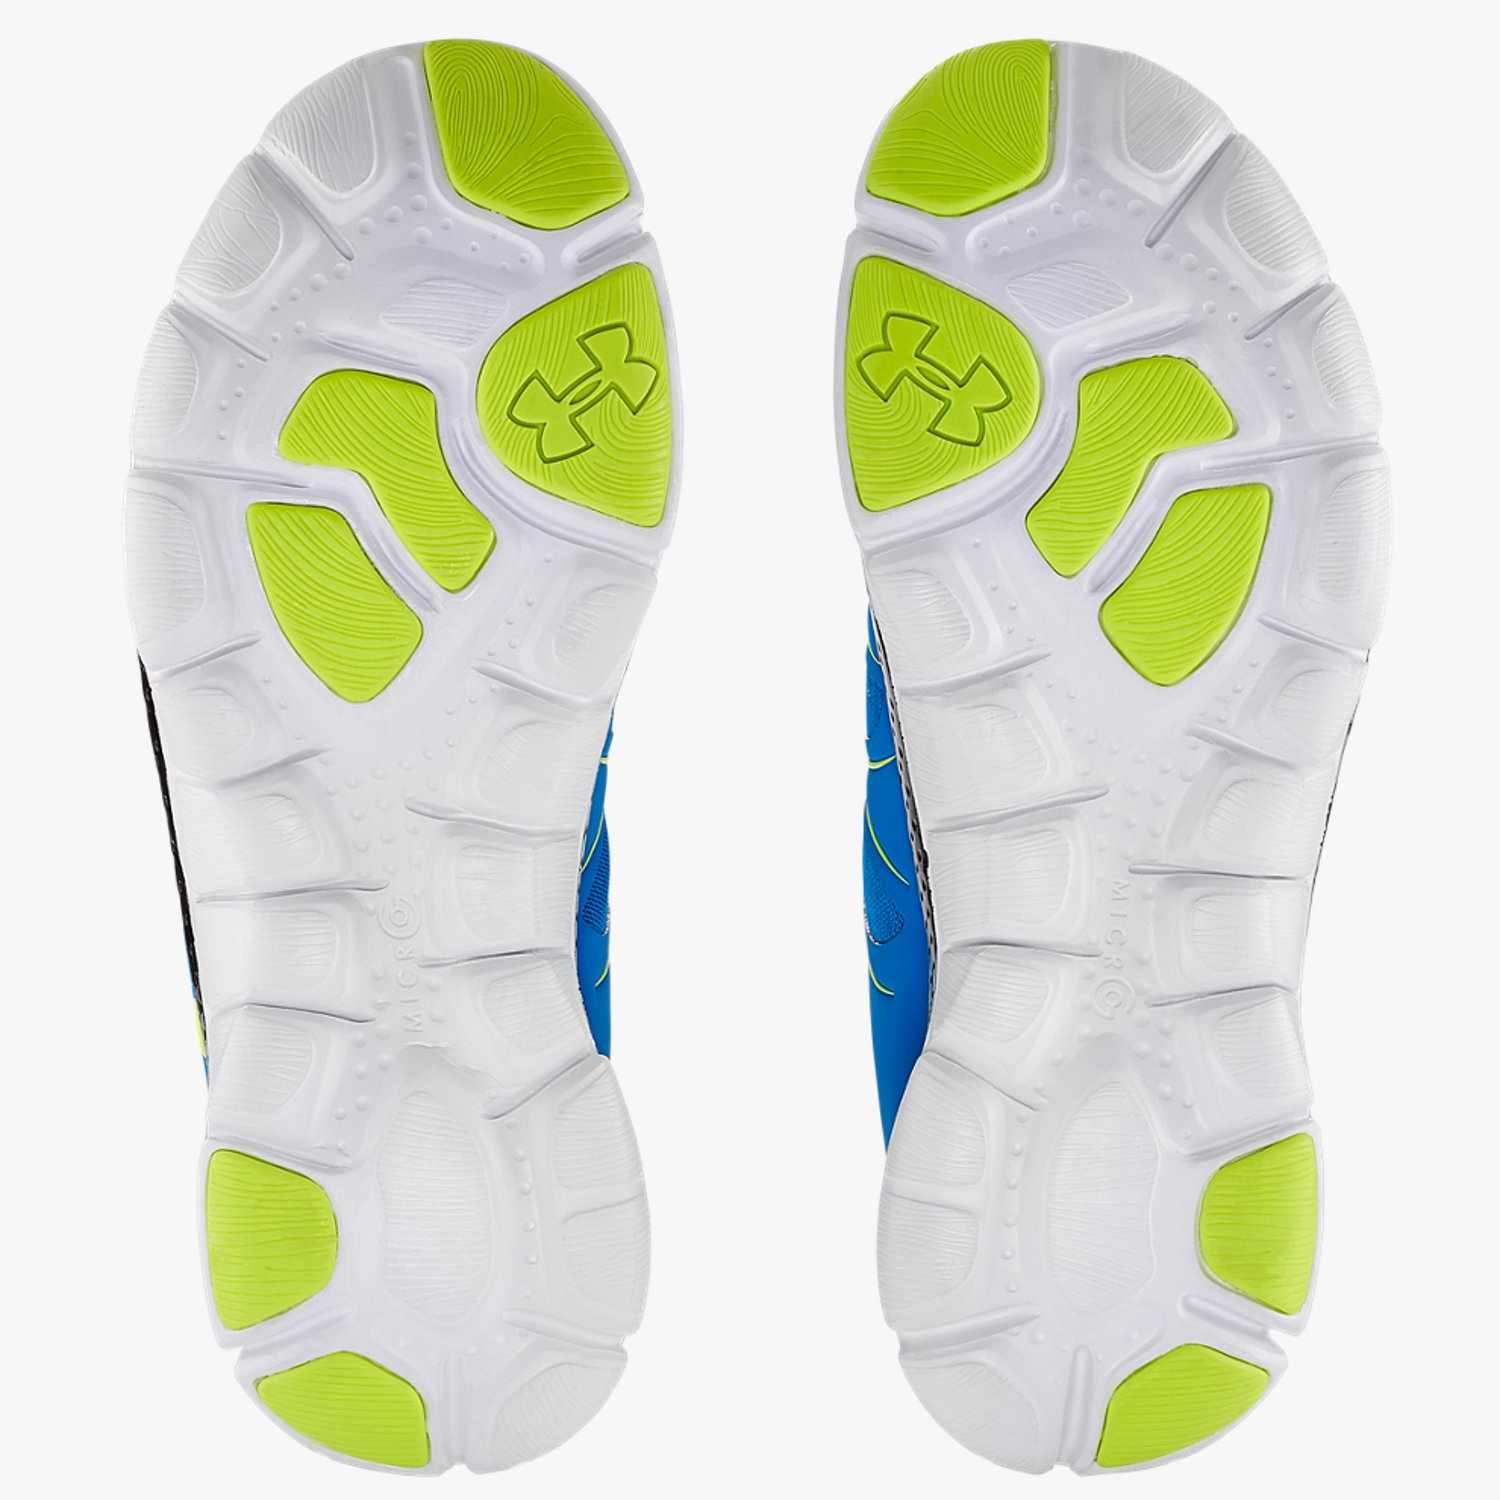  -  under armour Micro G Engage II